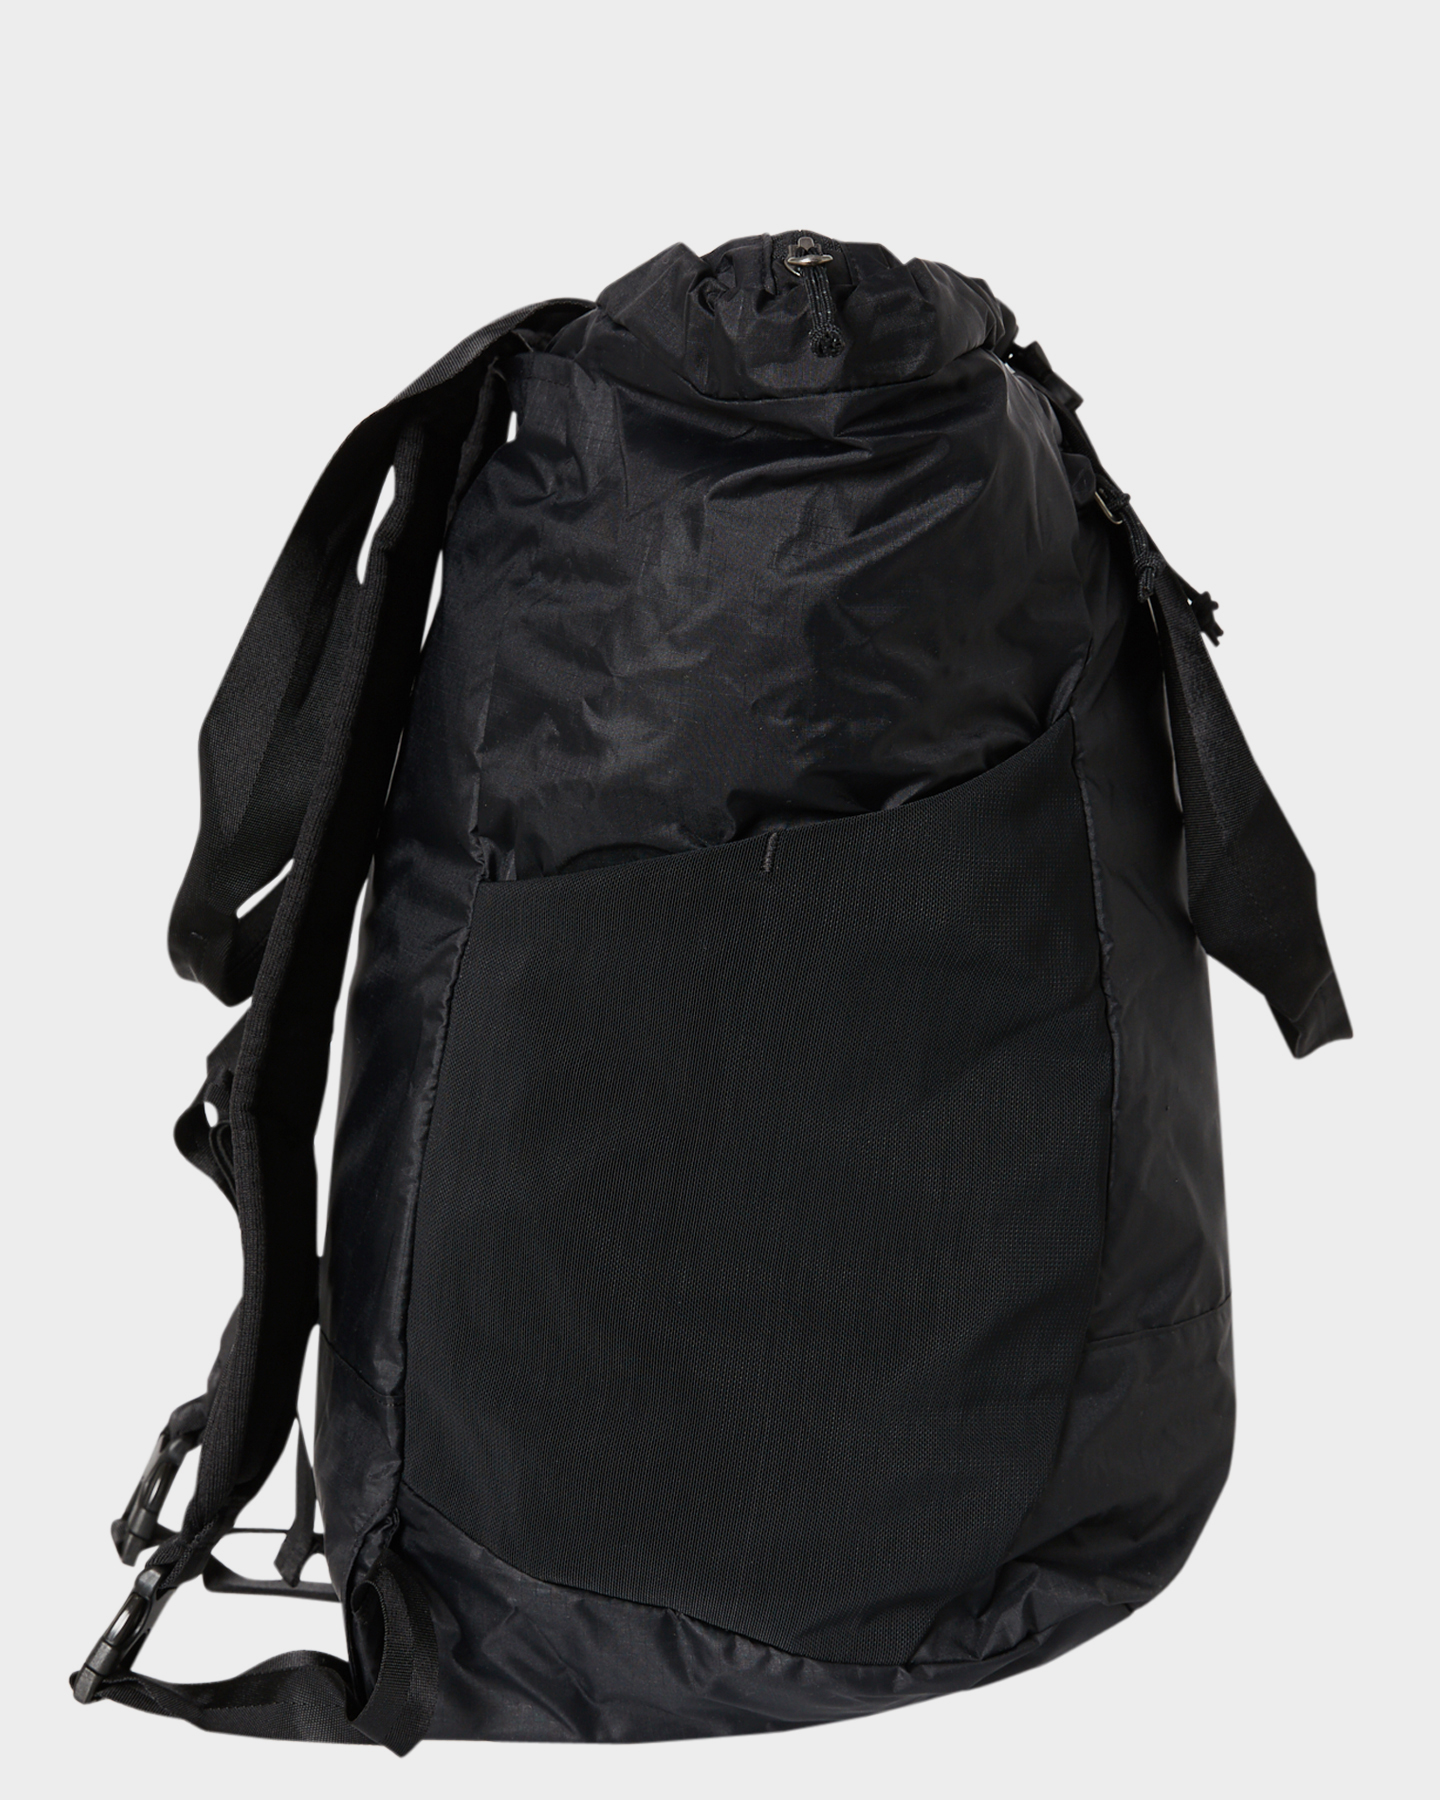 Patagonia Ultralight Black Hole Tote Pack - Black | SurfStitch